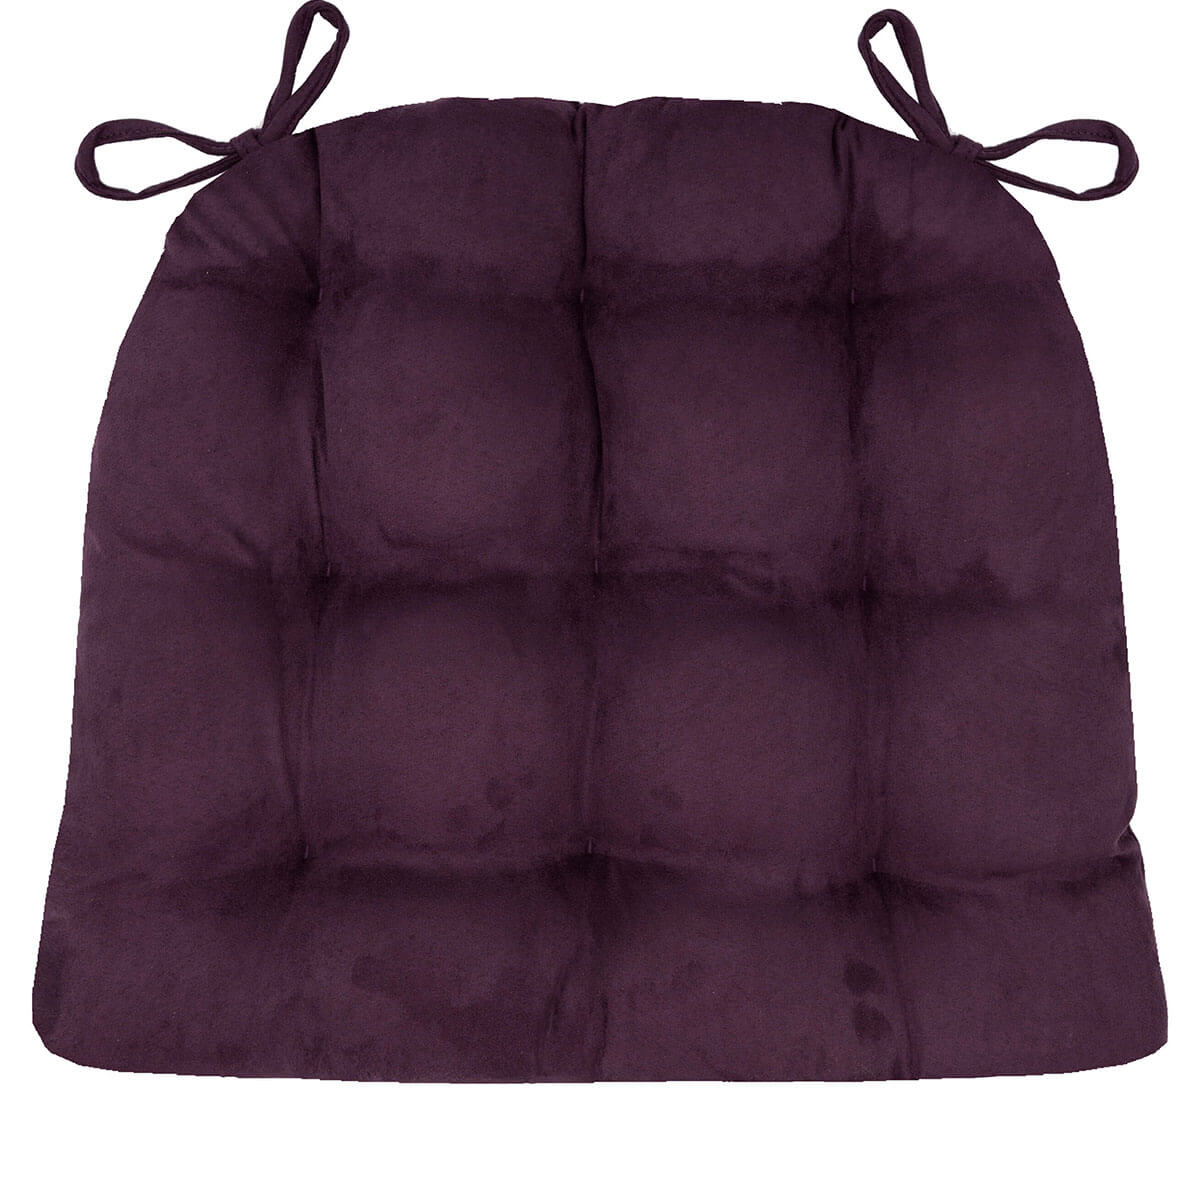 Micro-Suede Eggplant Dining Chair Pads - Latex Foam Fill, Reversible